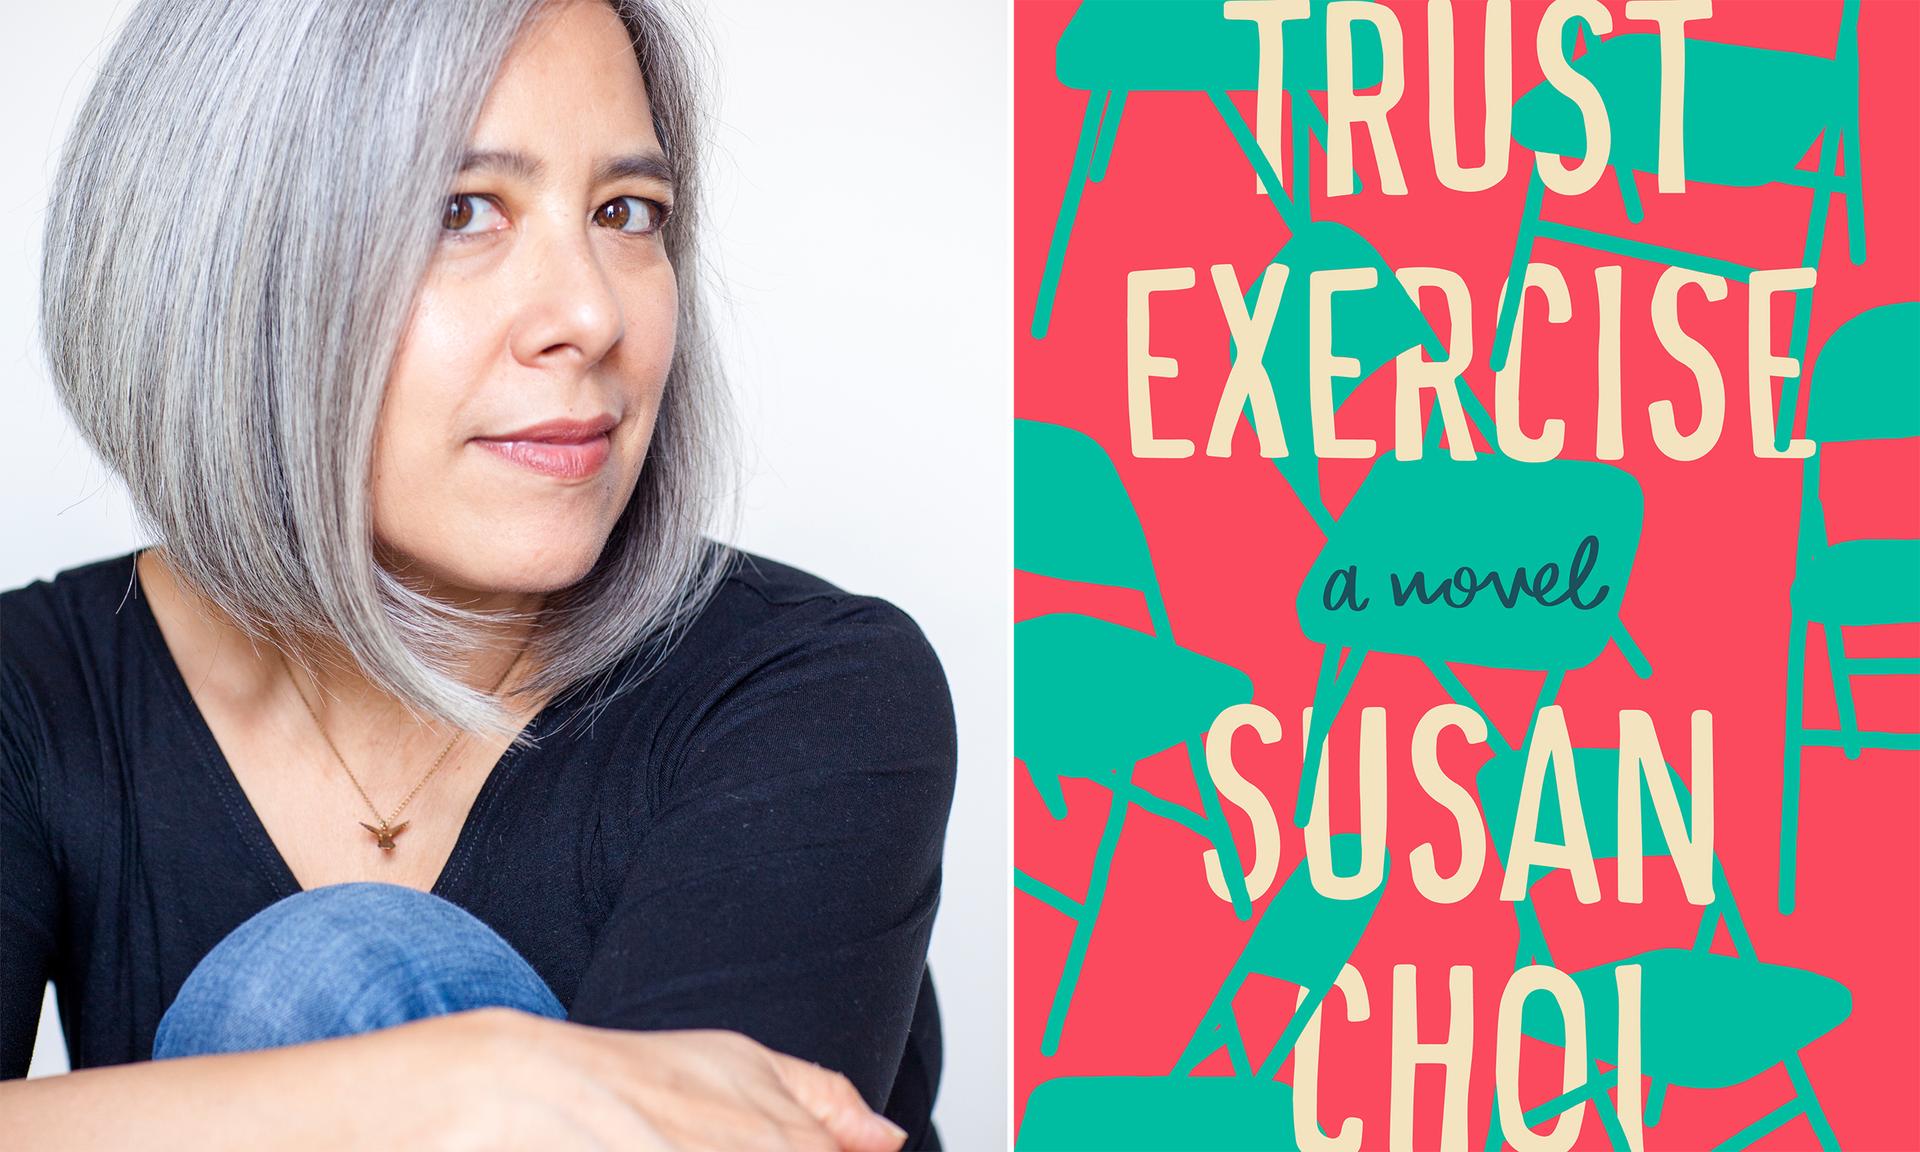 Susan Choi and her new novel, "Trust Exercise."